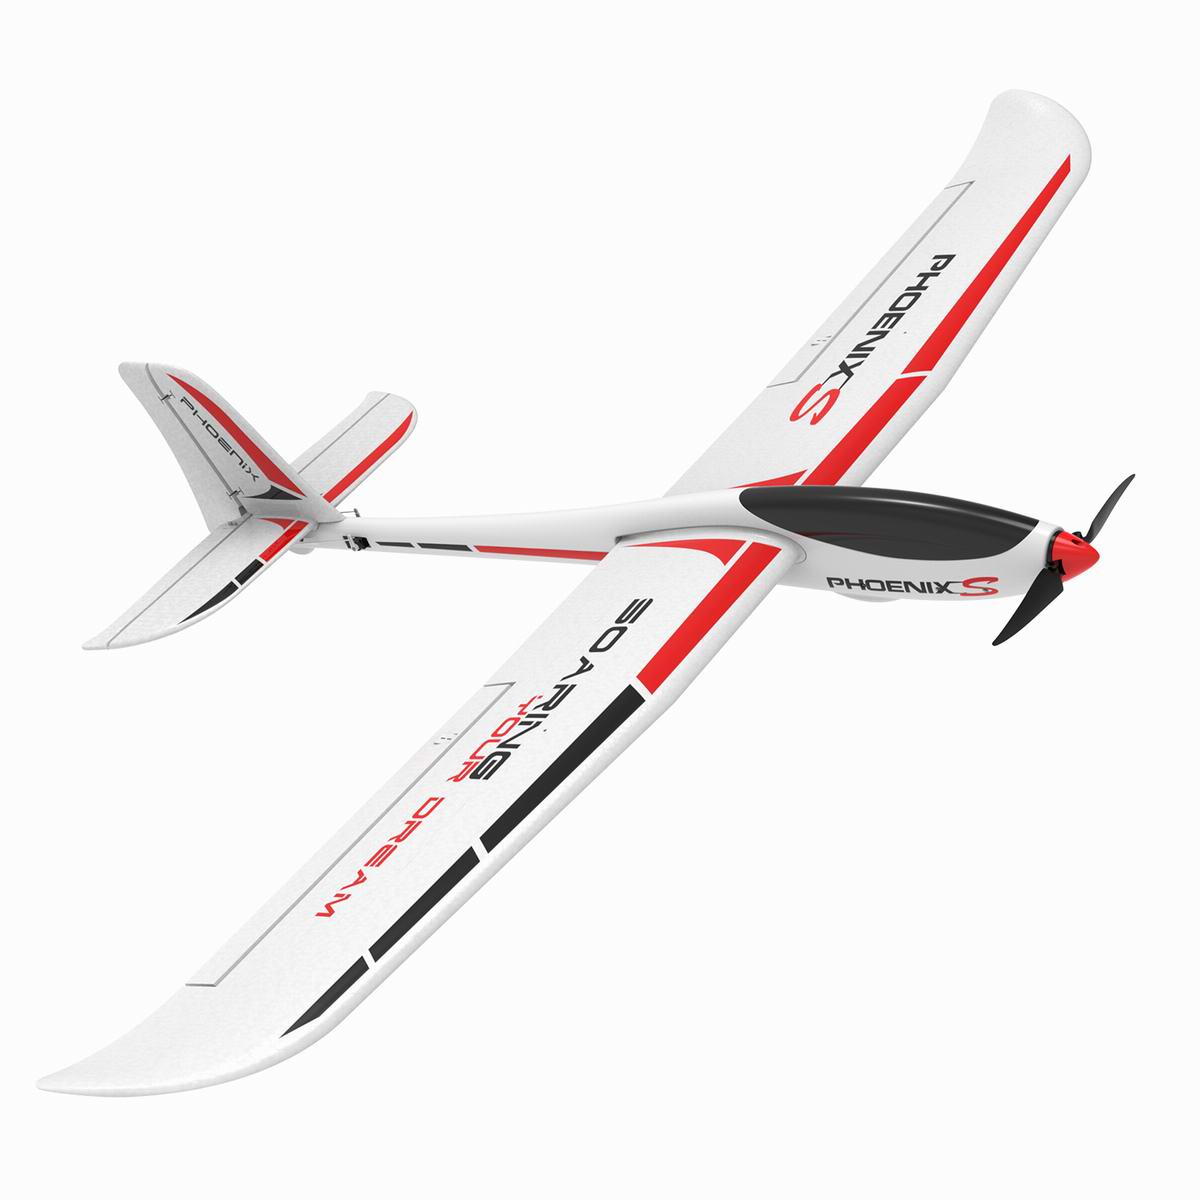 PhoenixS 4 Channel Glider with 1600MM Wingspan and Streamline ABS Plastic Fuselage and (742-7) PNP.